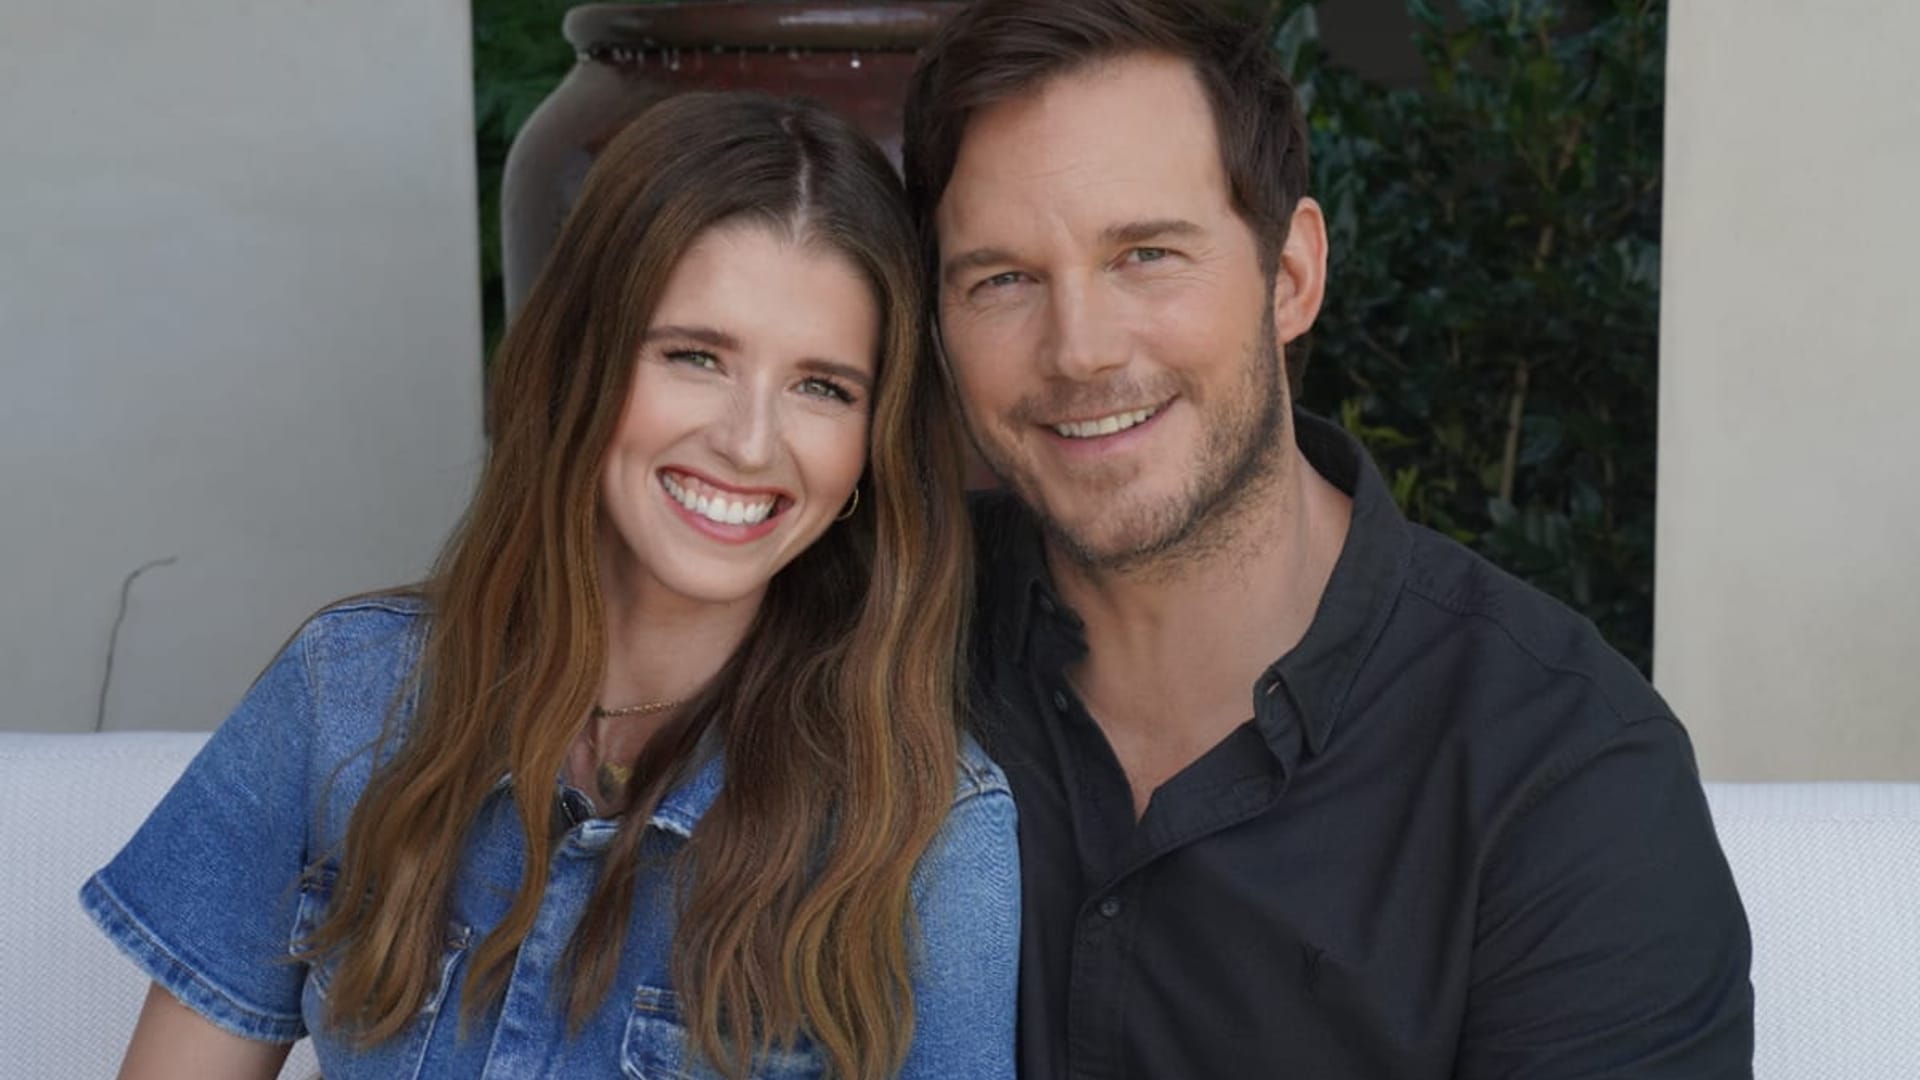 Chris Pratt and Katherine Schwarzenegger have a new role together